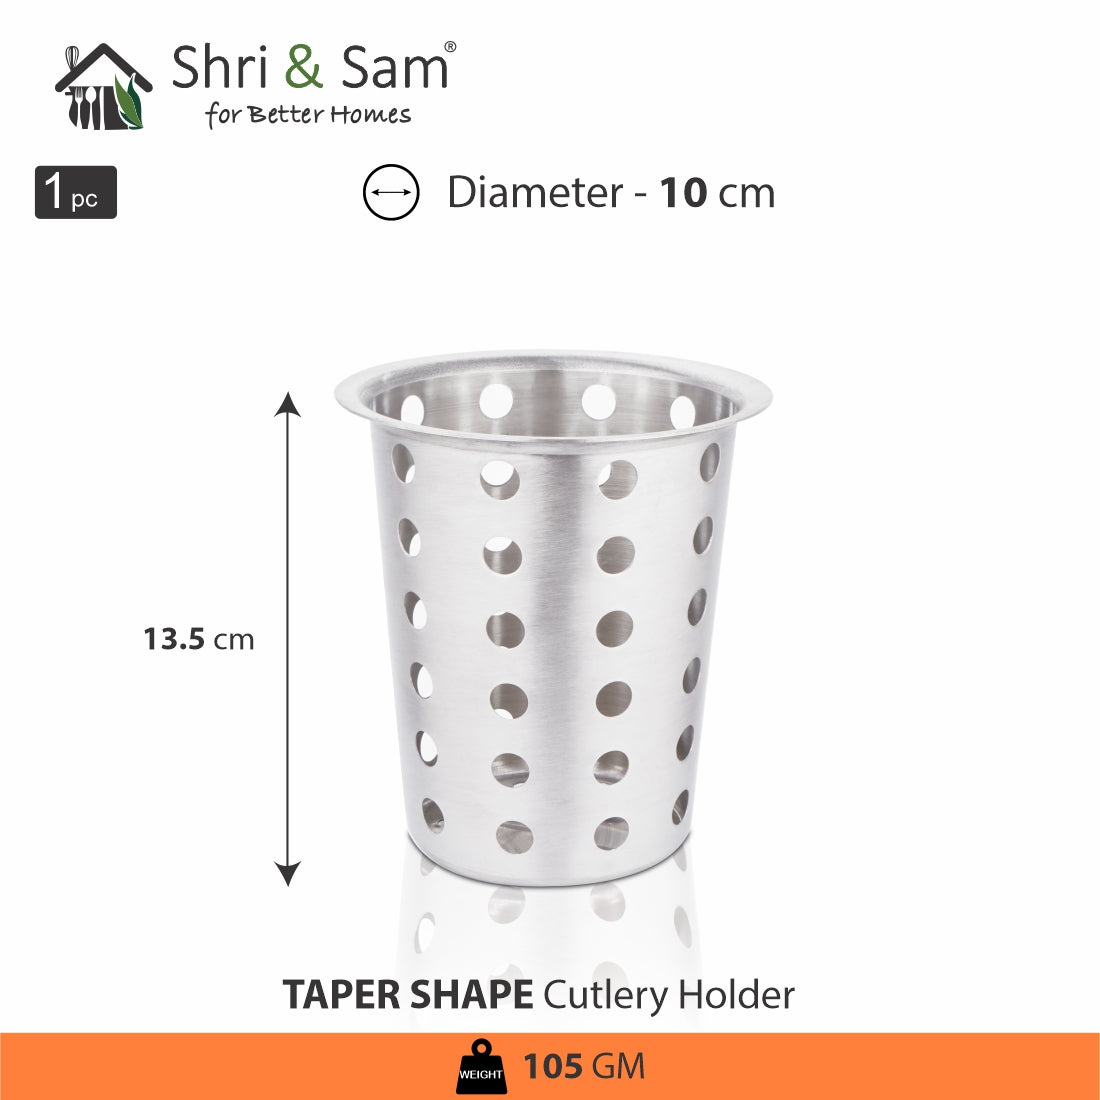 Stainless Steel Cutlery Holder Taper Shape with Holes